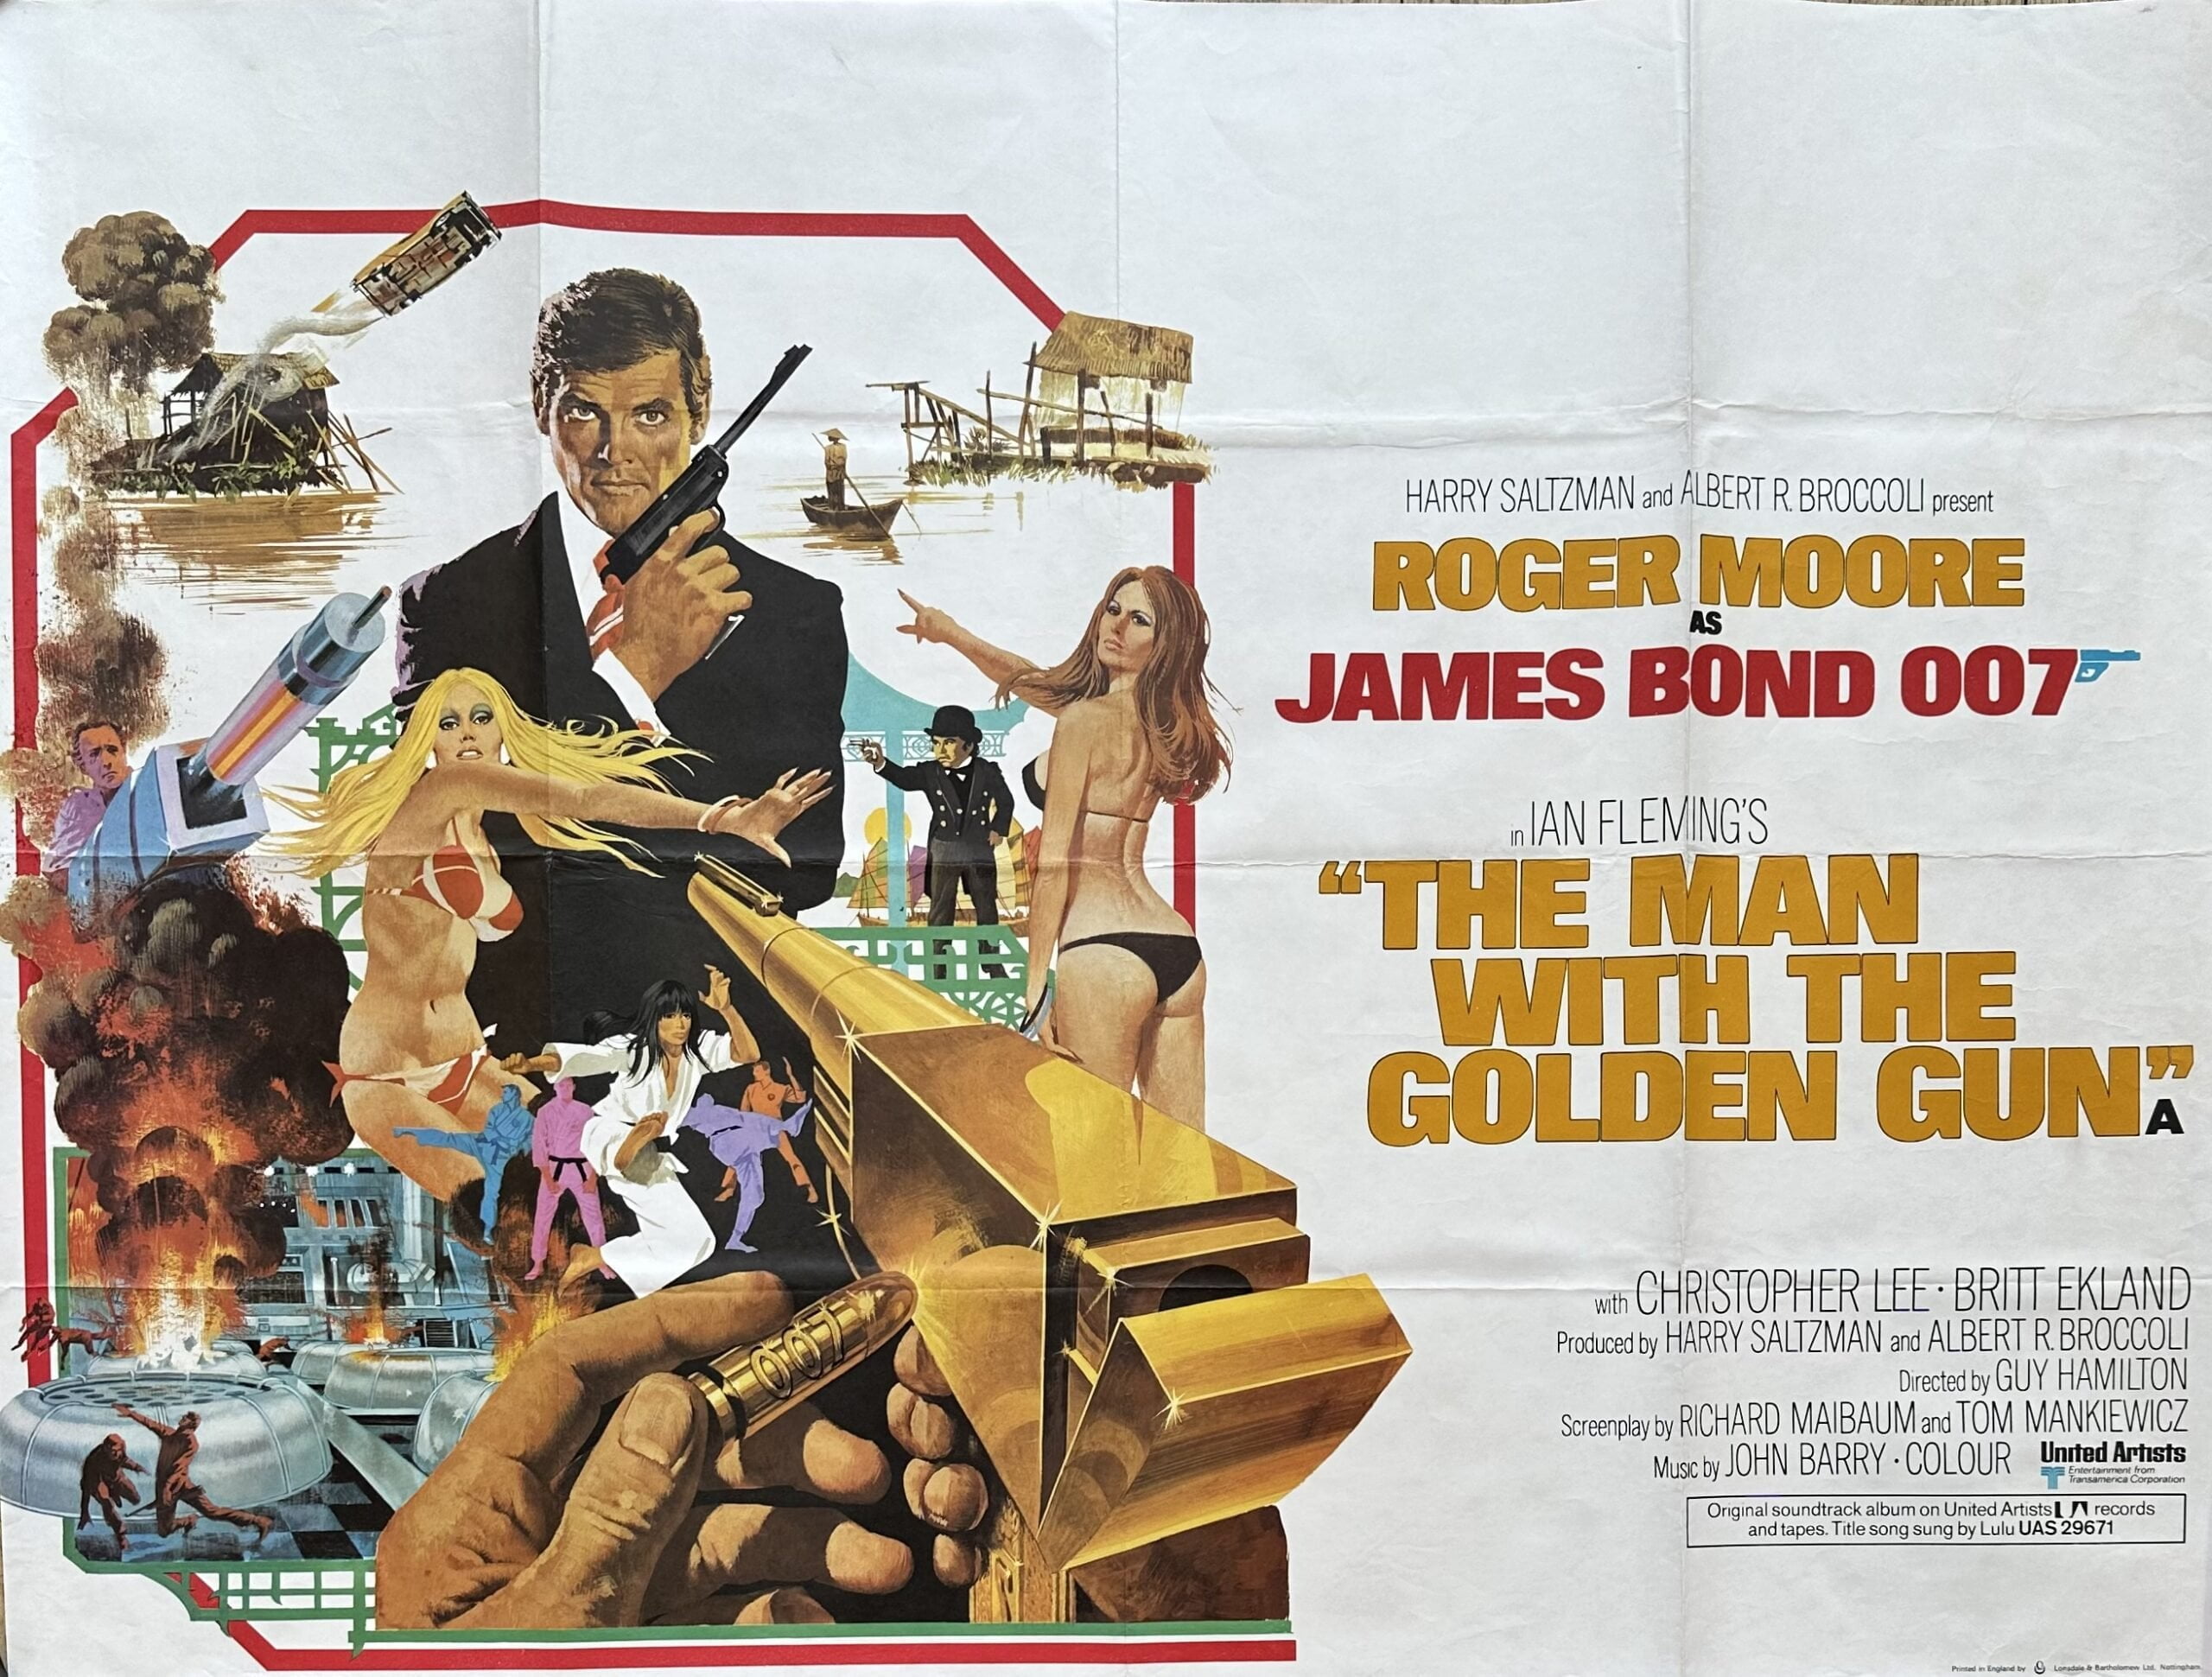 Original vintage cinema movie poster for Roger Moore as James Bond 007 in The Man with the Golden Gun